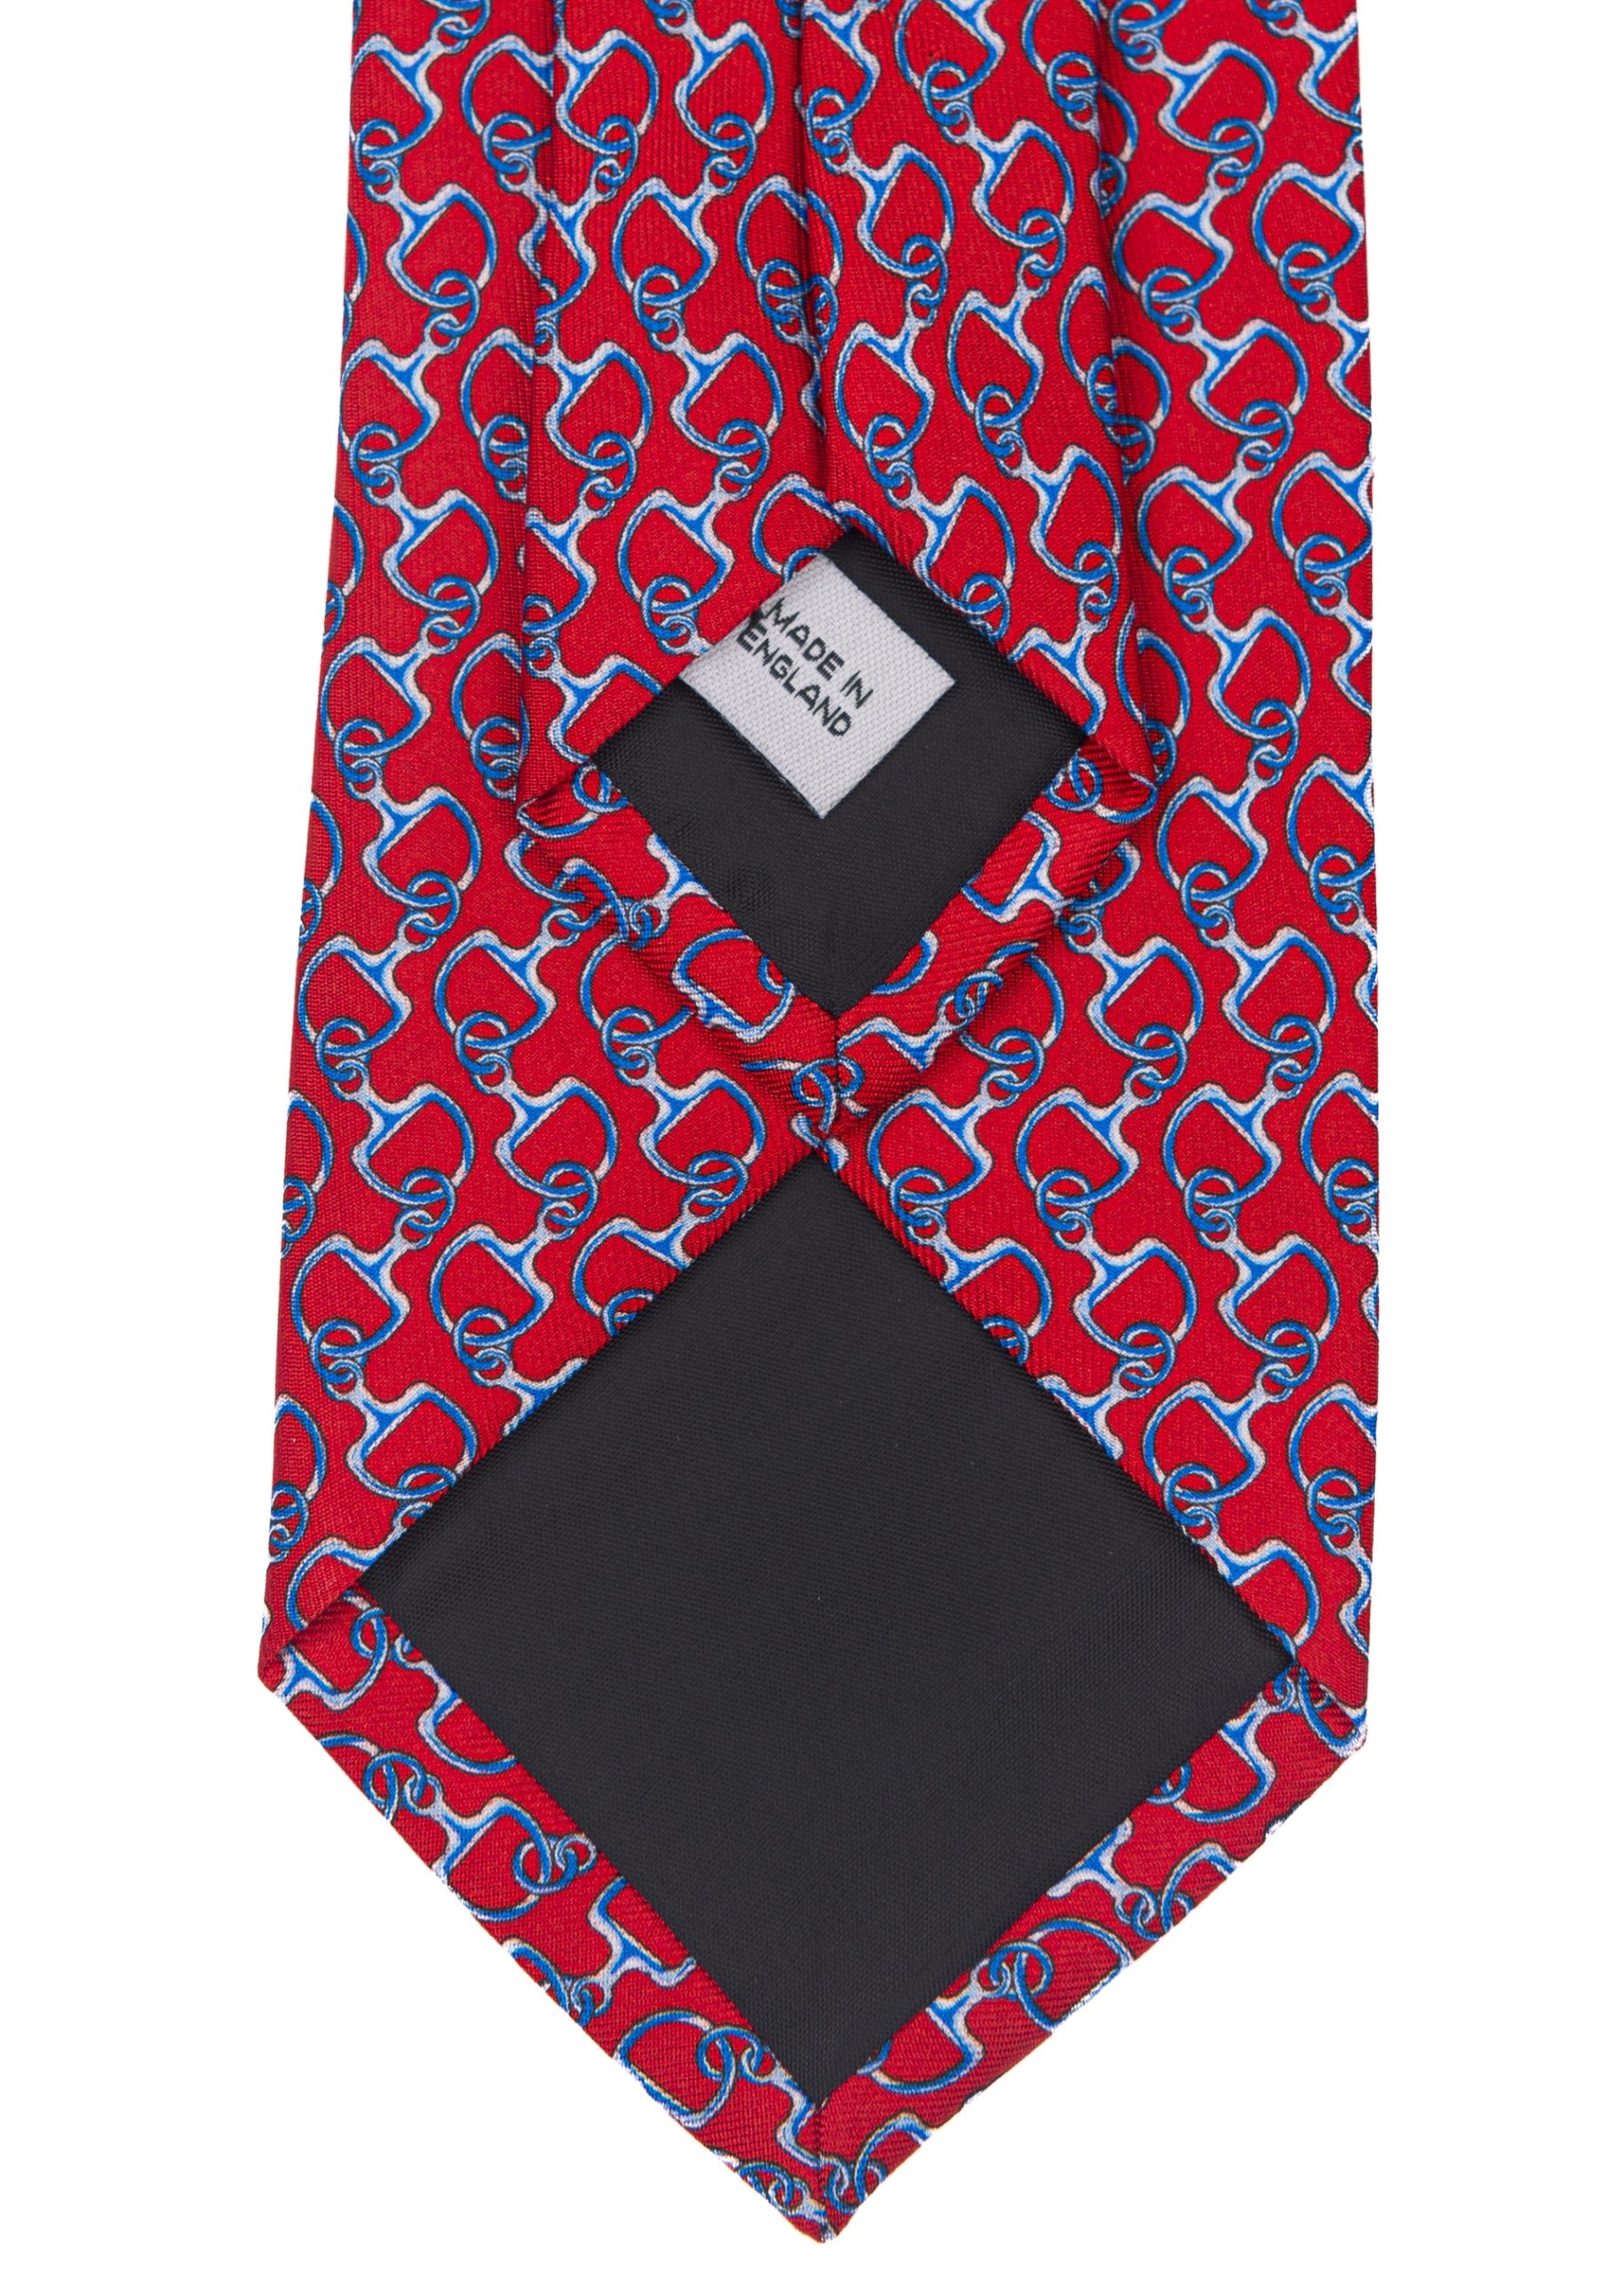 Men’s snaffle tie in red and blue by Roderick Charles London